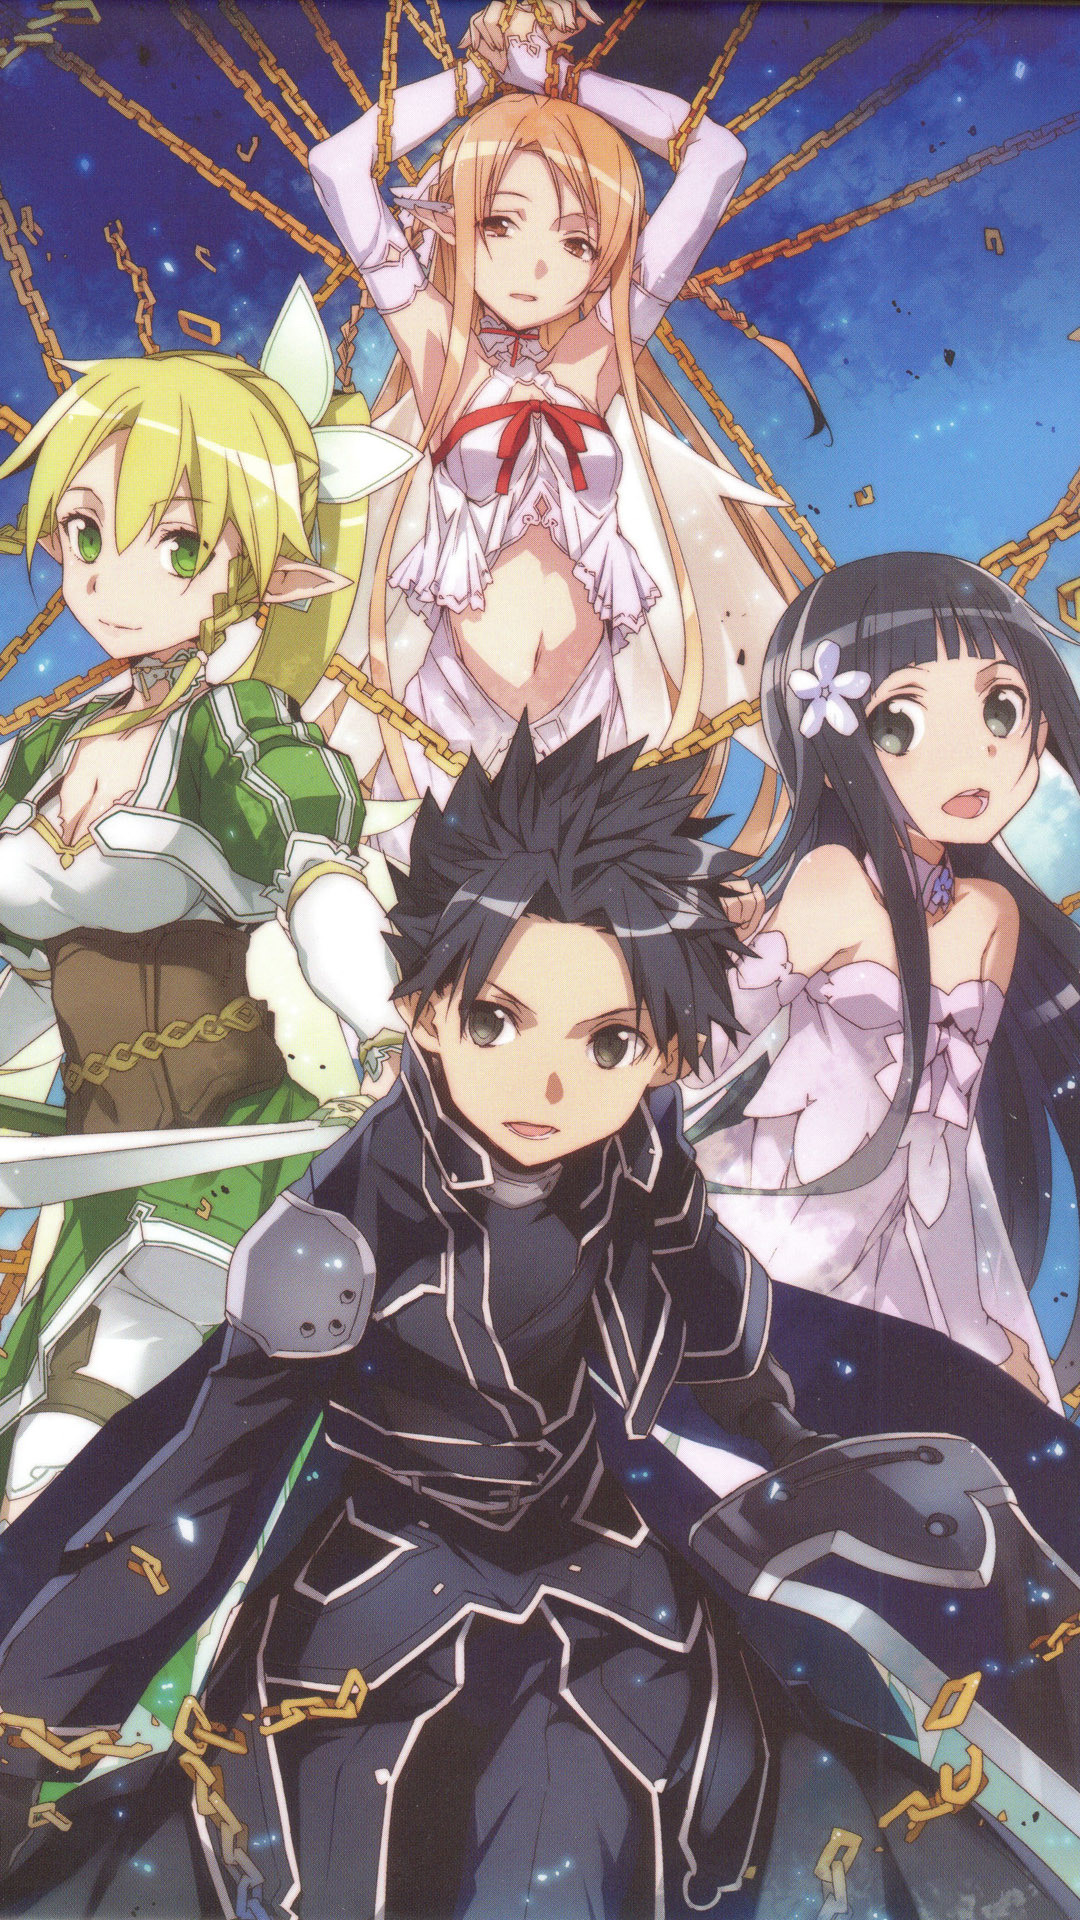 1080x1920 ... 2286 sword art online hd wallpapers backgrounds wallpaper abyss; htc  windows phone 8x wallpapers page 227 ...